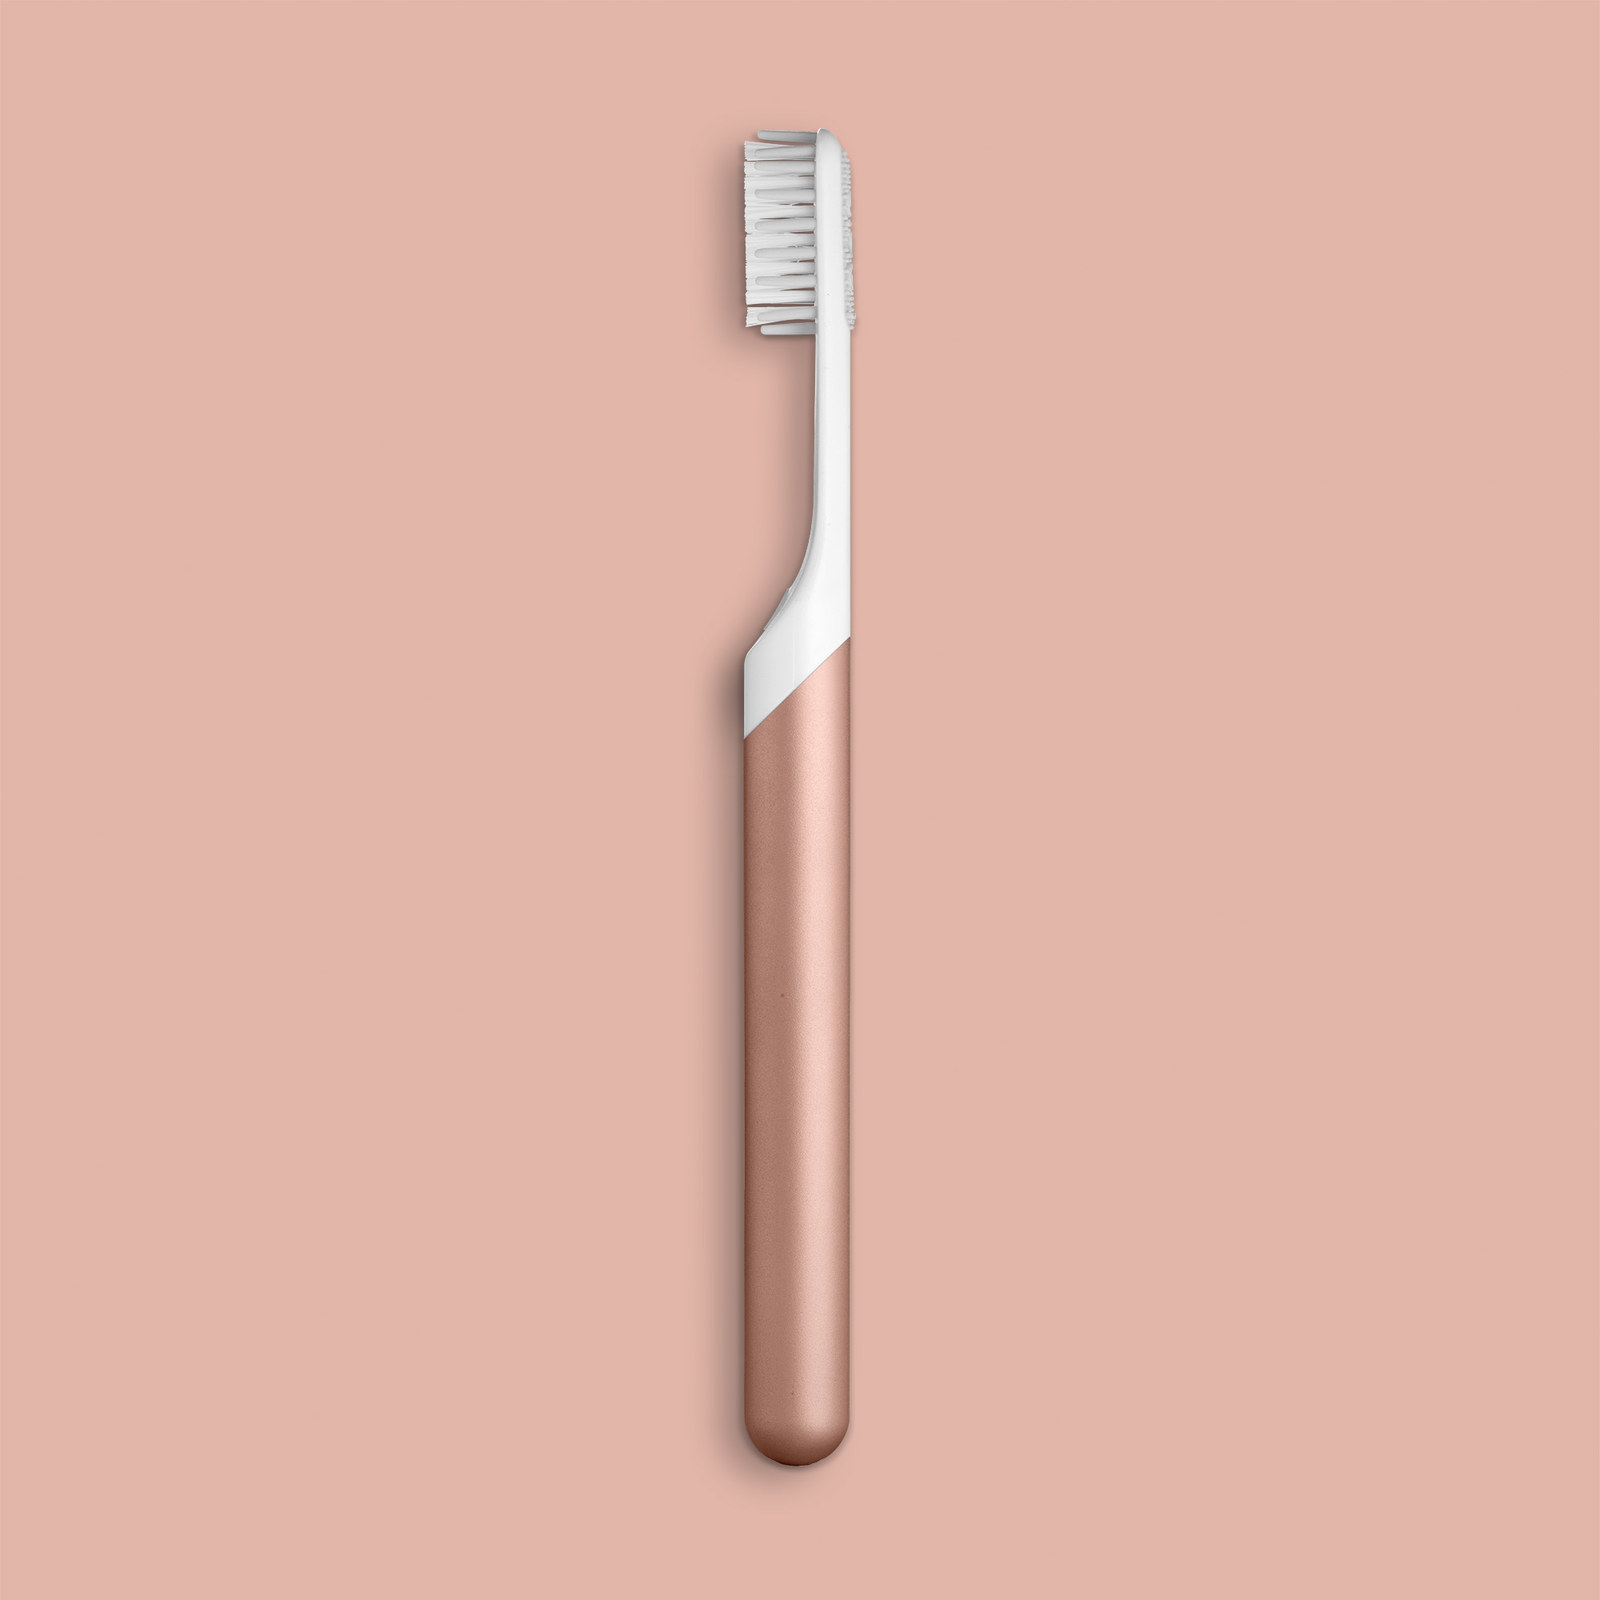 Quip Electric Toothbrush $25-$45